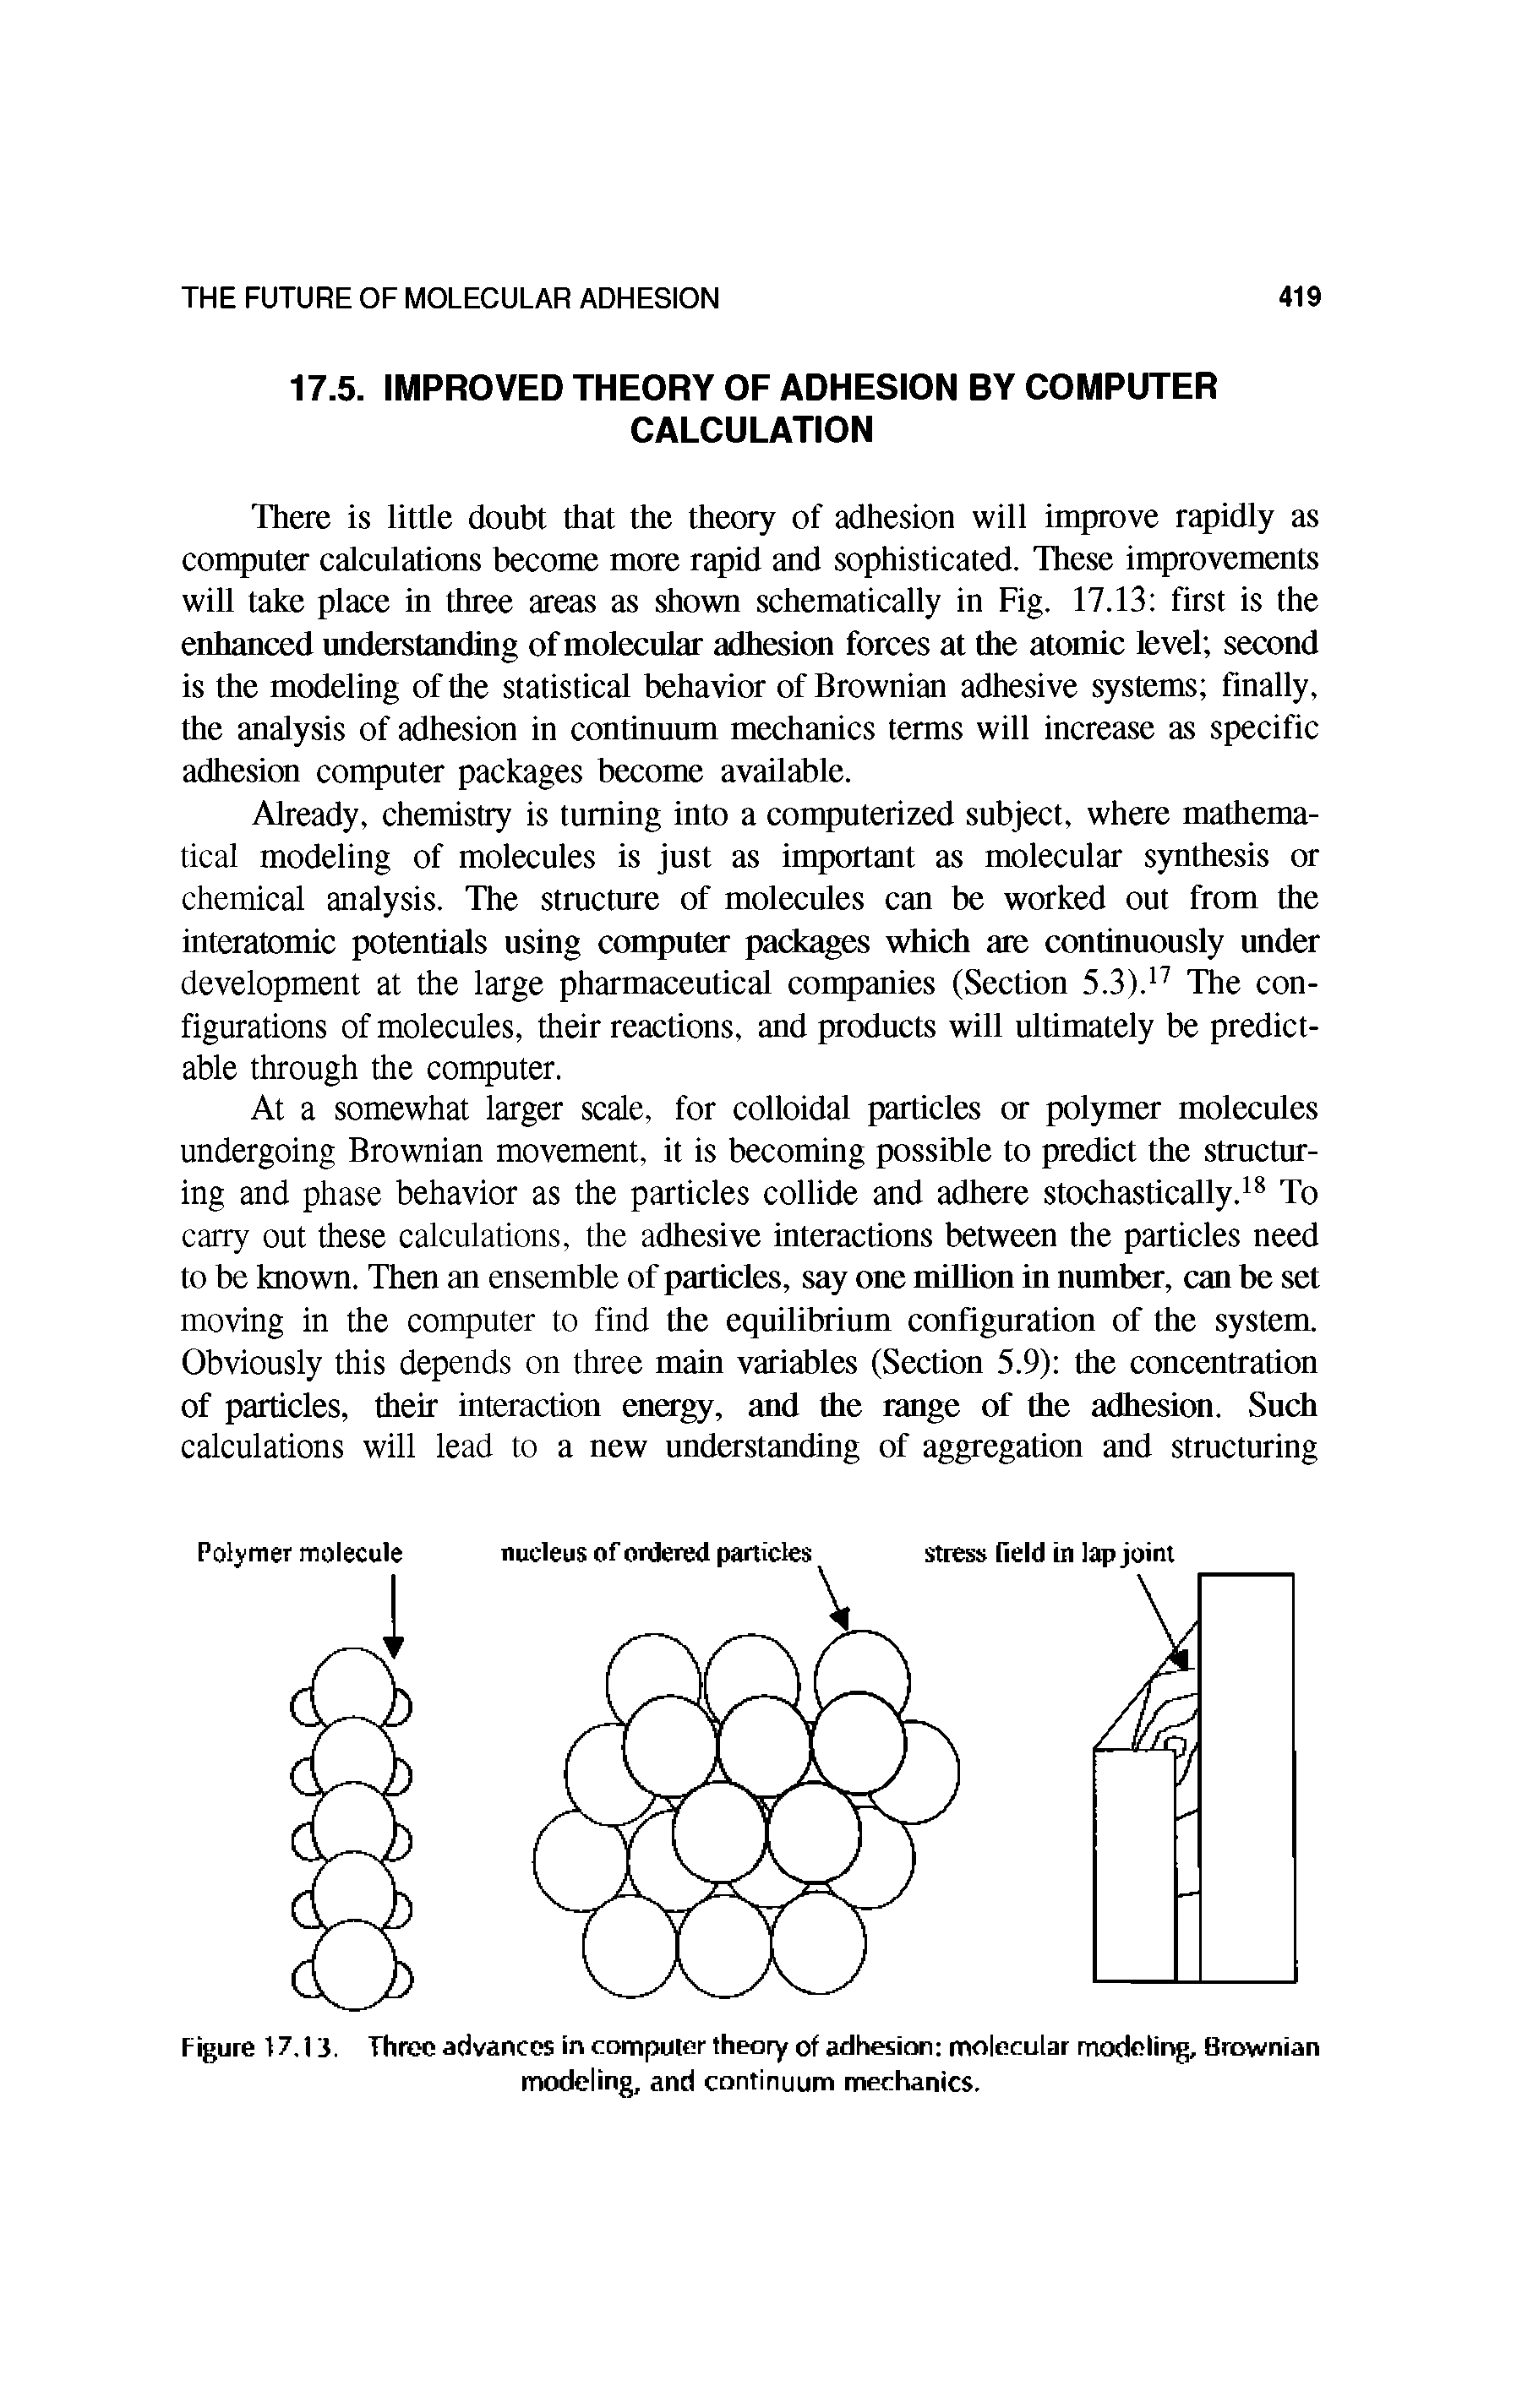 Figure 17.13. Three advances in computer theory of adhesion molecular modeling. Brownian modeling, and continuum mechanics.